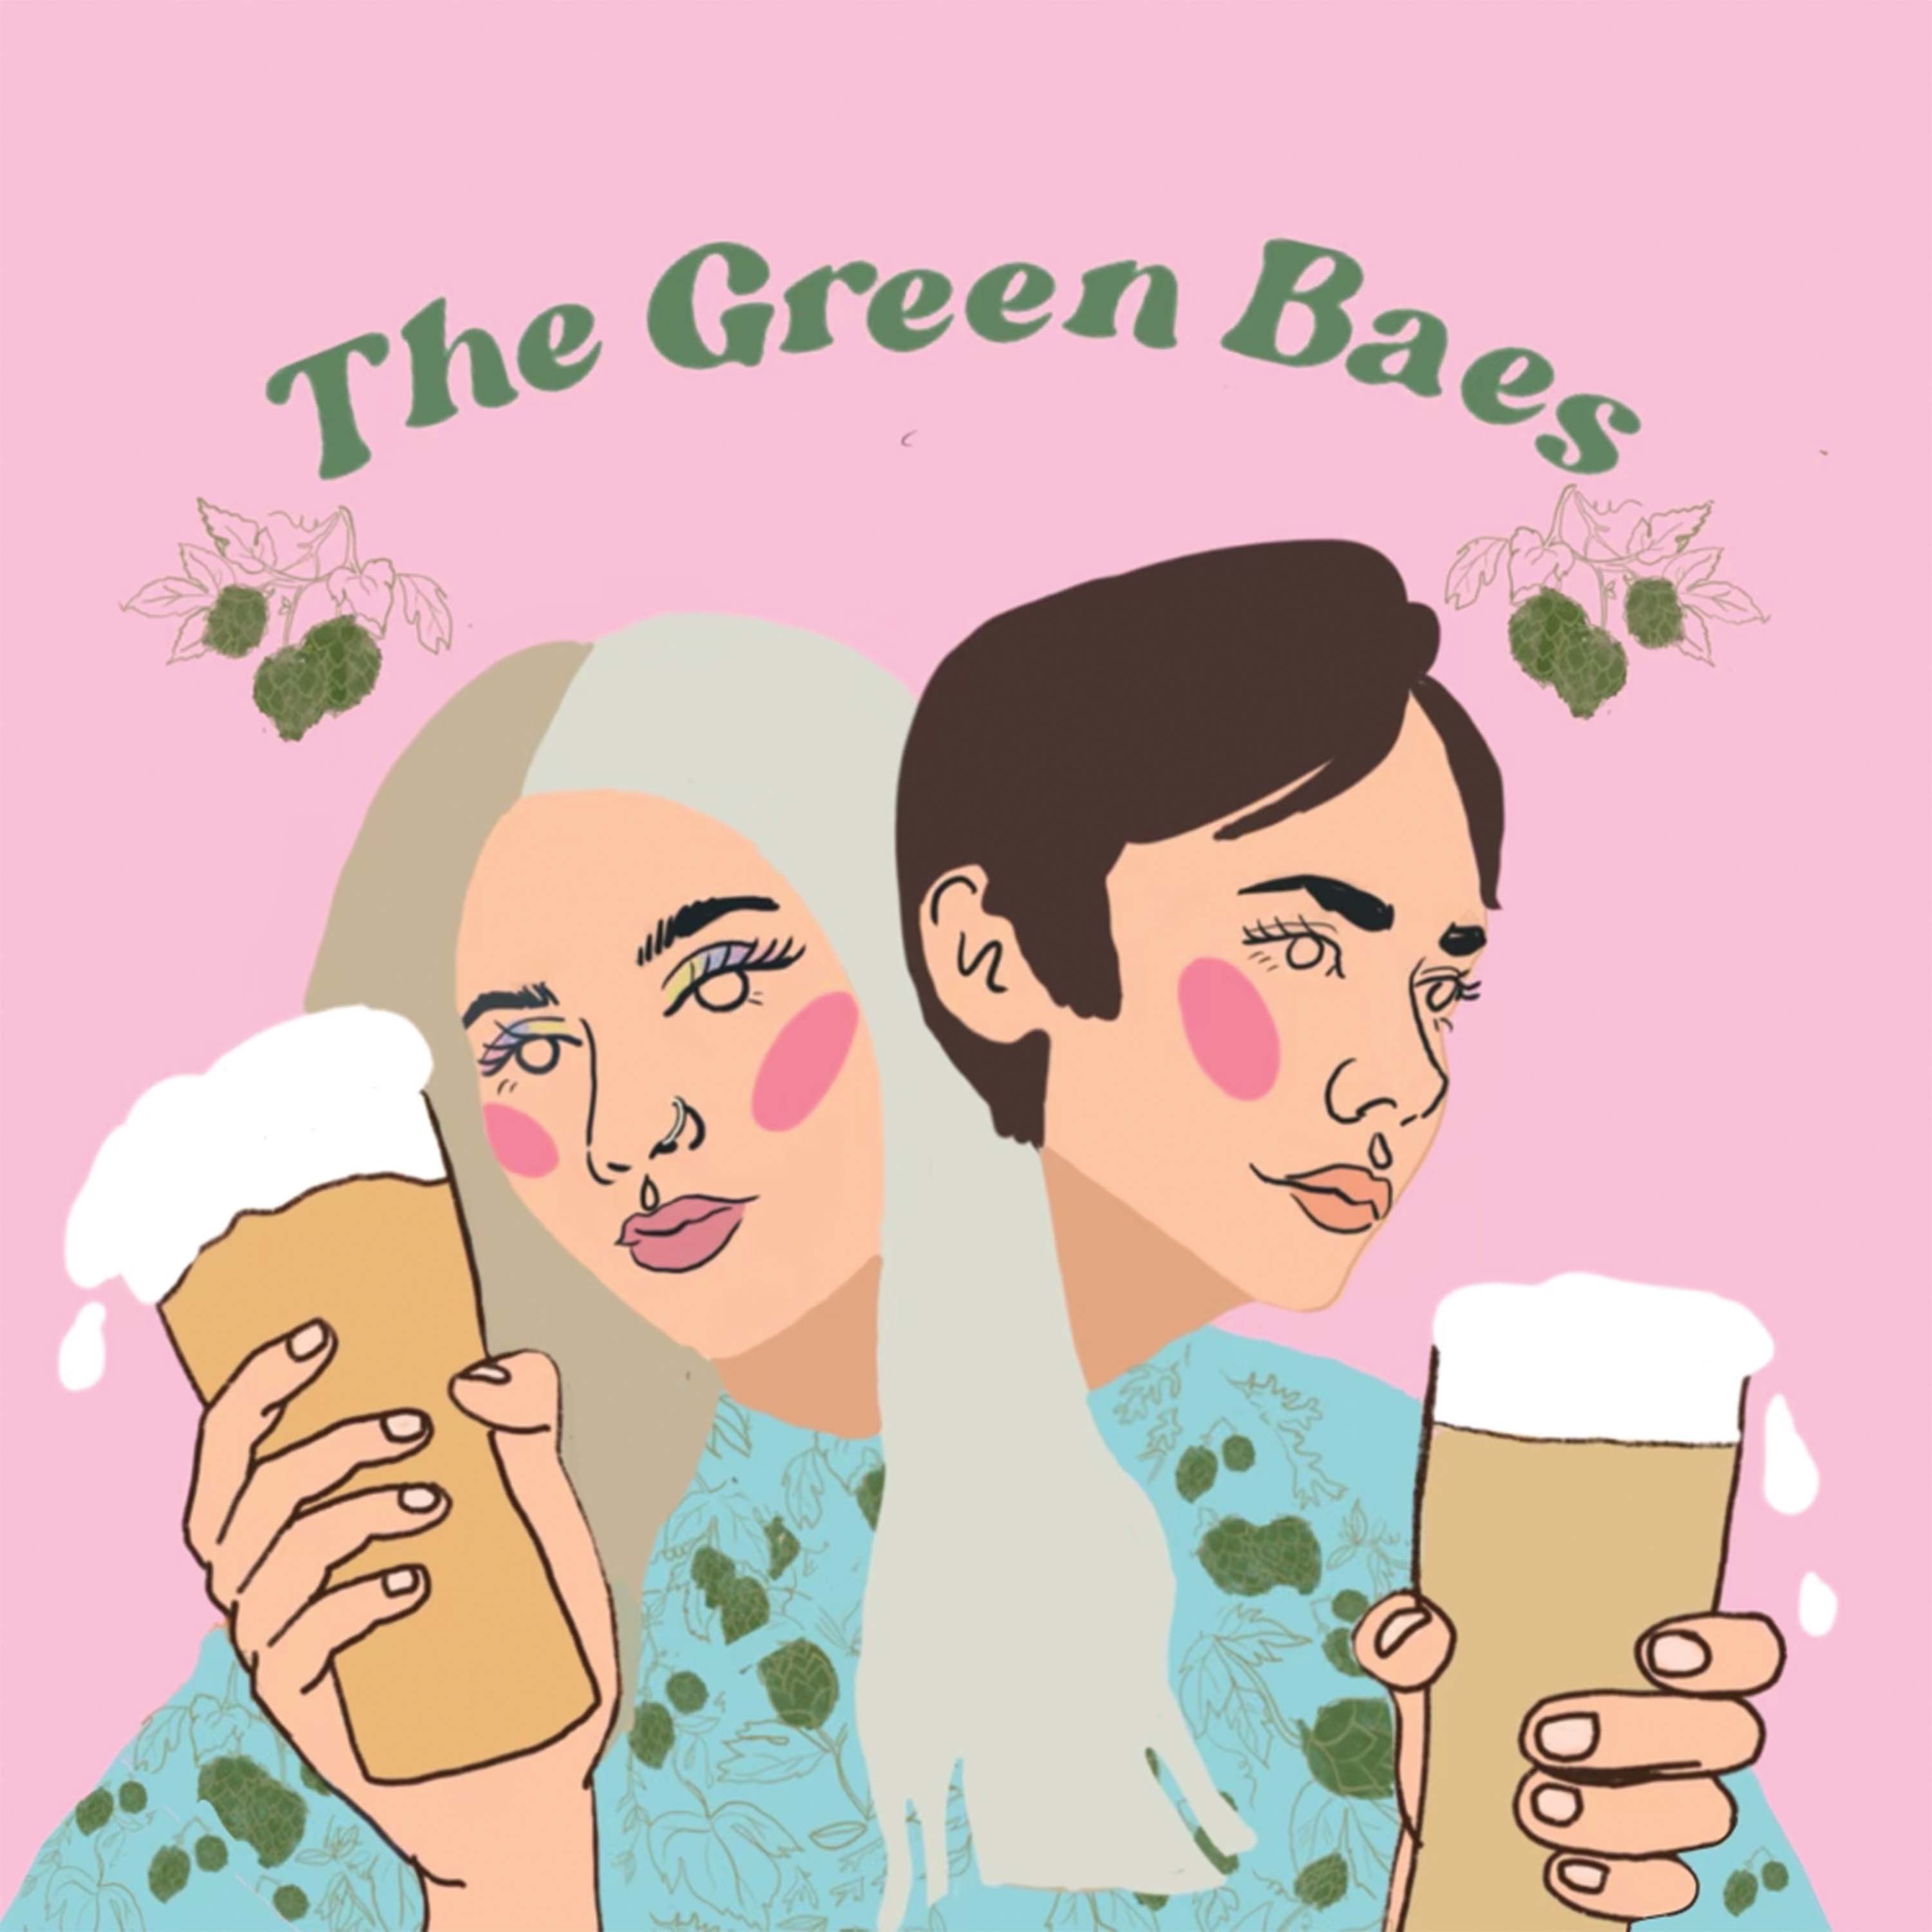 The Green Baes